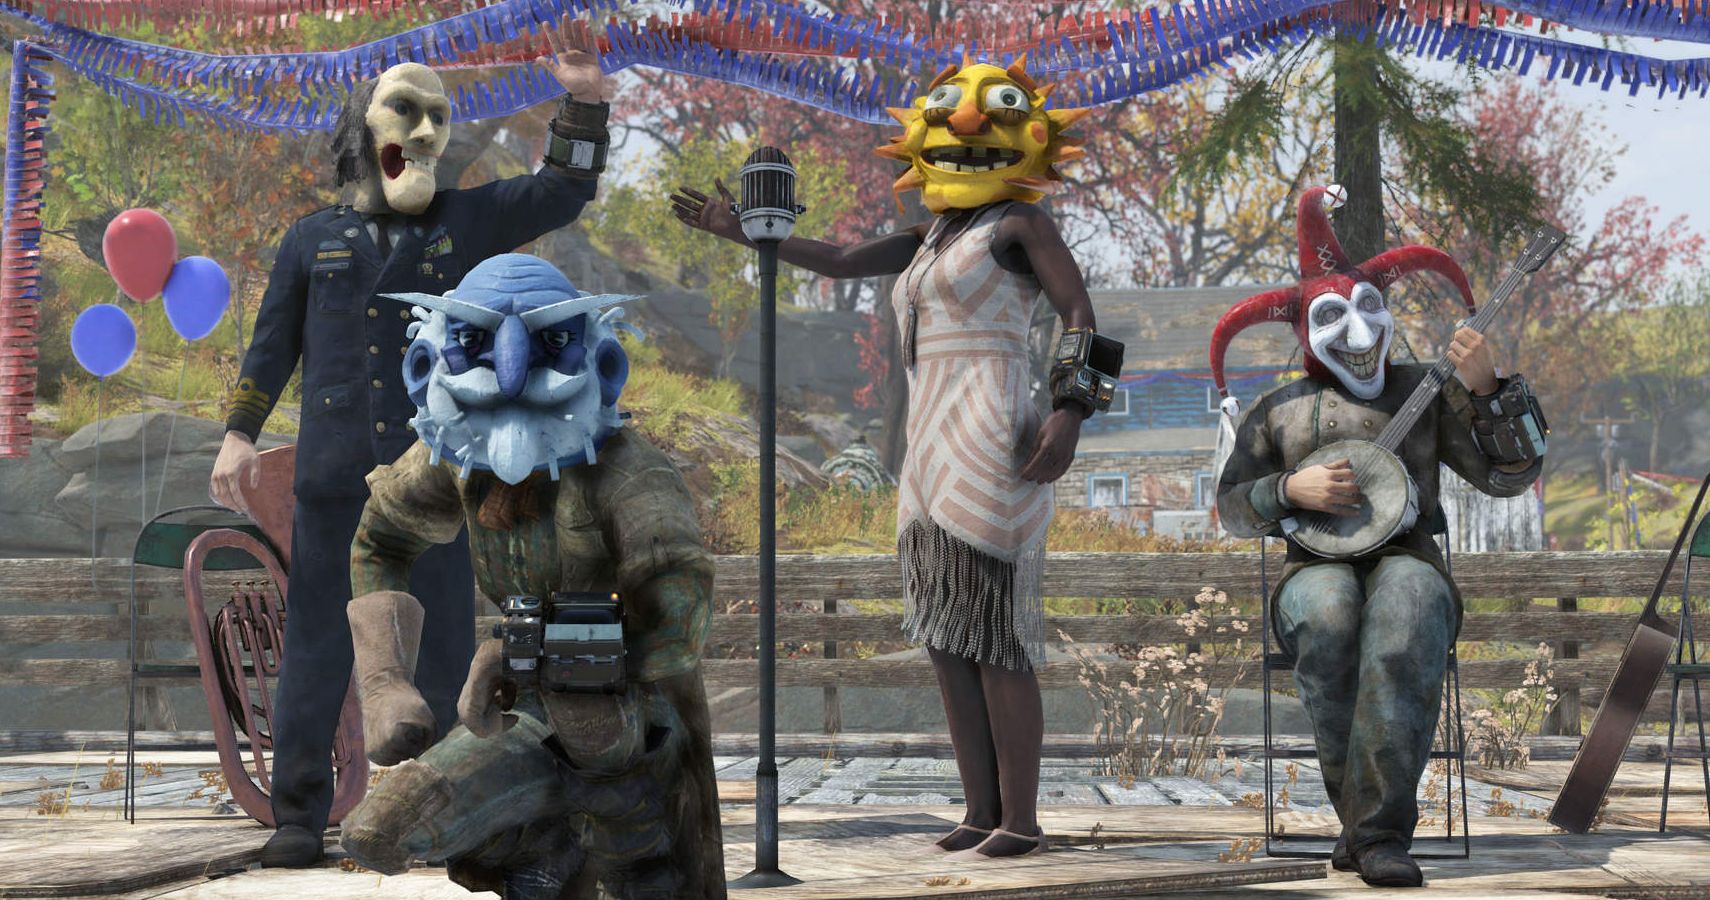 Fasnacht Day Parades Return To Fallout 76 With Three New Masks Up For Grabs